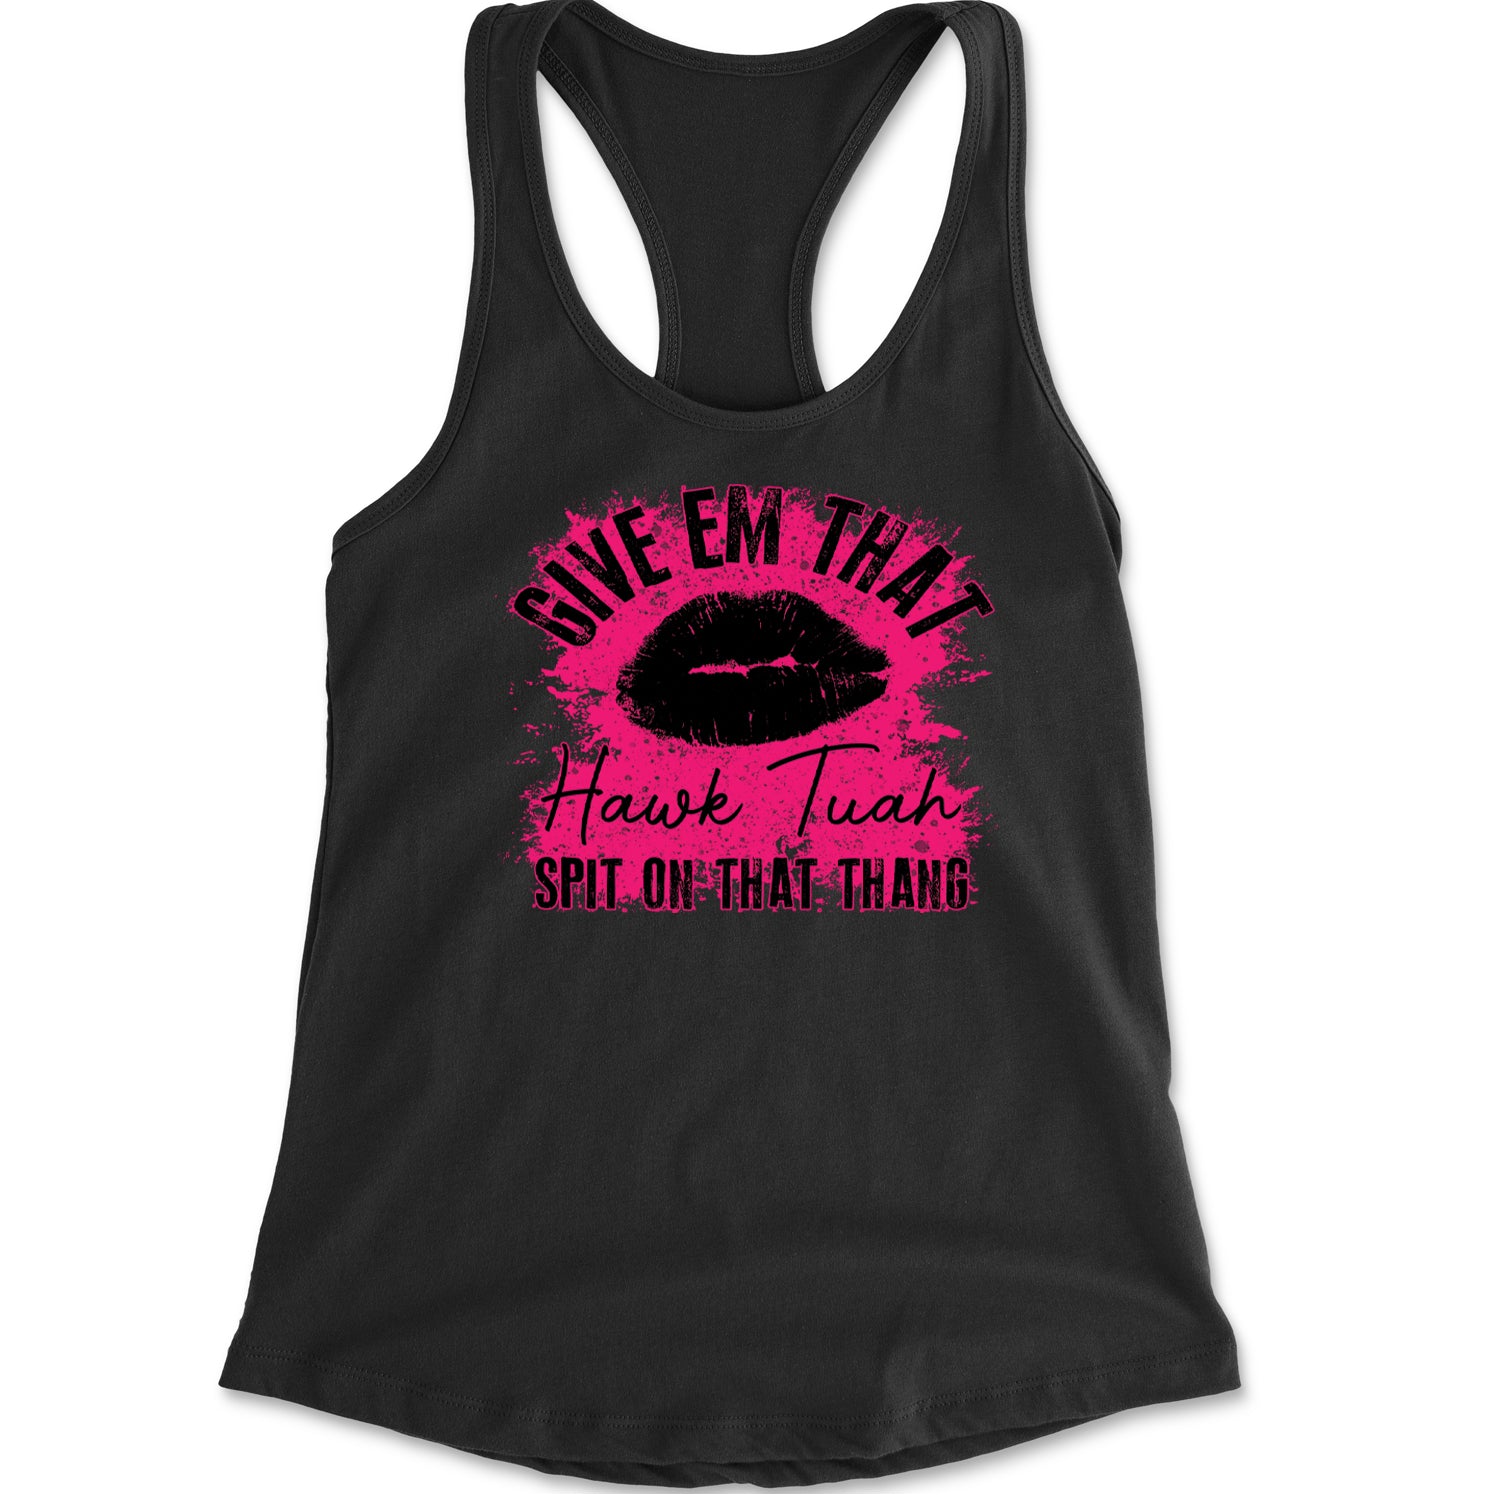 Give 'Em Hawk Tuah Spit On That Thang Racerback Tank Top for Women Heather Grey